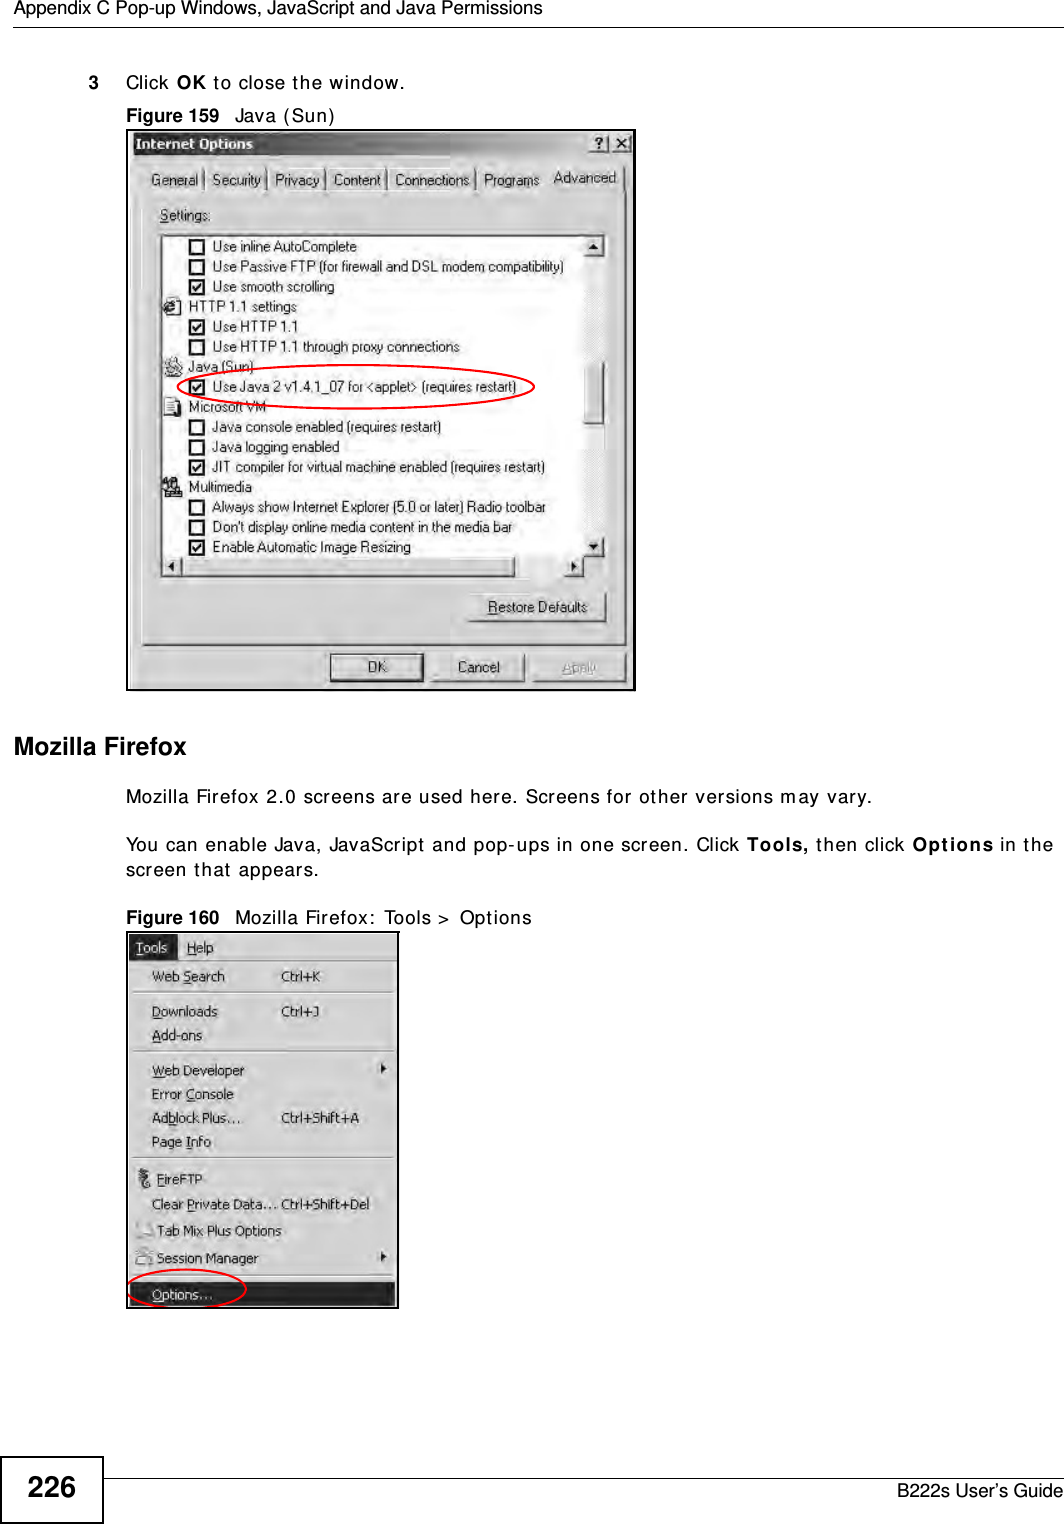 Appendix C Pop-up Windows, JavaScript and Java PermissionsB222s User’s Guide2263Click OK t o close t he window.Figure 159   Java (Sun)Mozilla FirefoxMozilla Firefox 2.0 screens are used here. Screens for ot her versions m ay vary. You can enable Java, JavaScript  and pop-ups in one screen. Click Tools, t hen click Opt ions in the screen t hat  appears.Figure 160   Mozilla Firefox:  Tools &gt;  Opt ions